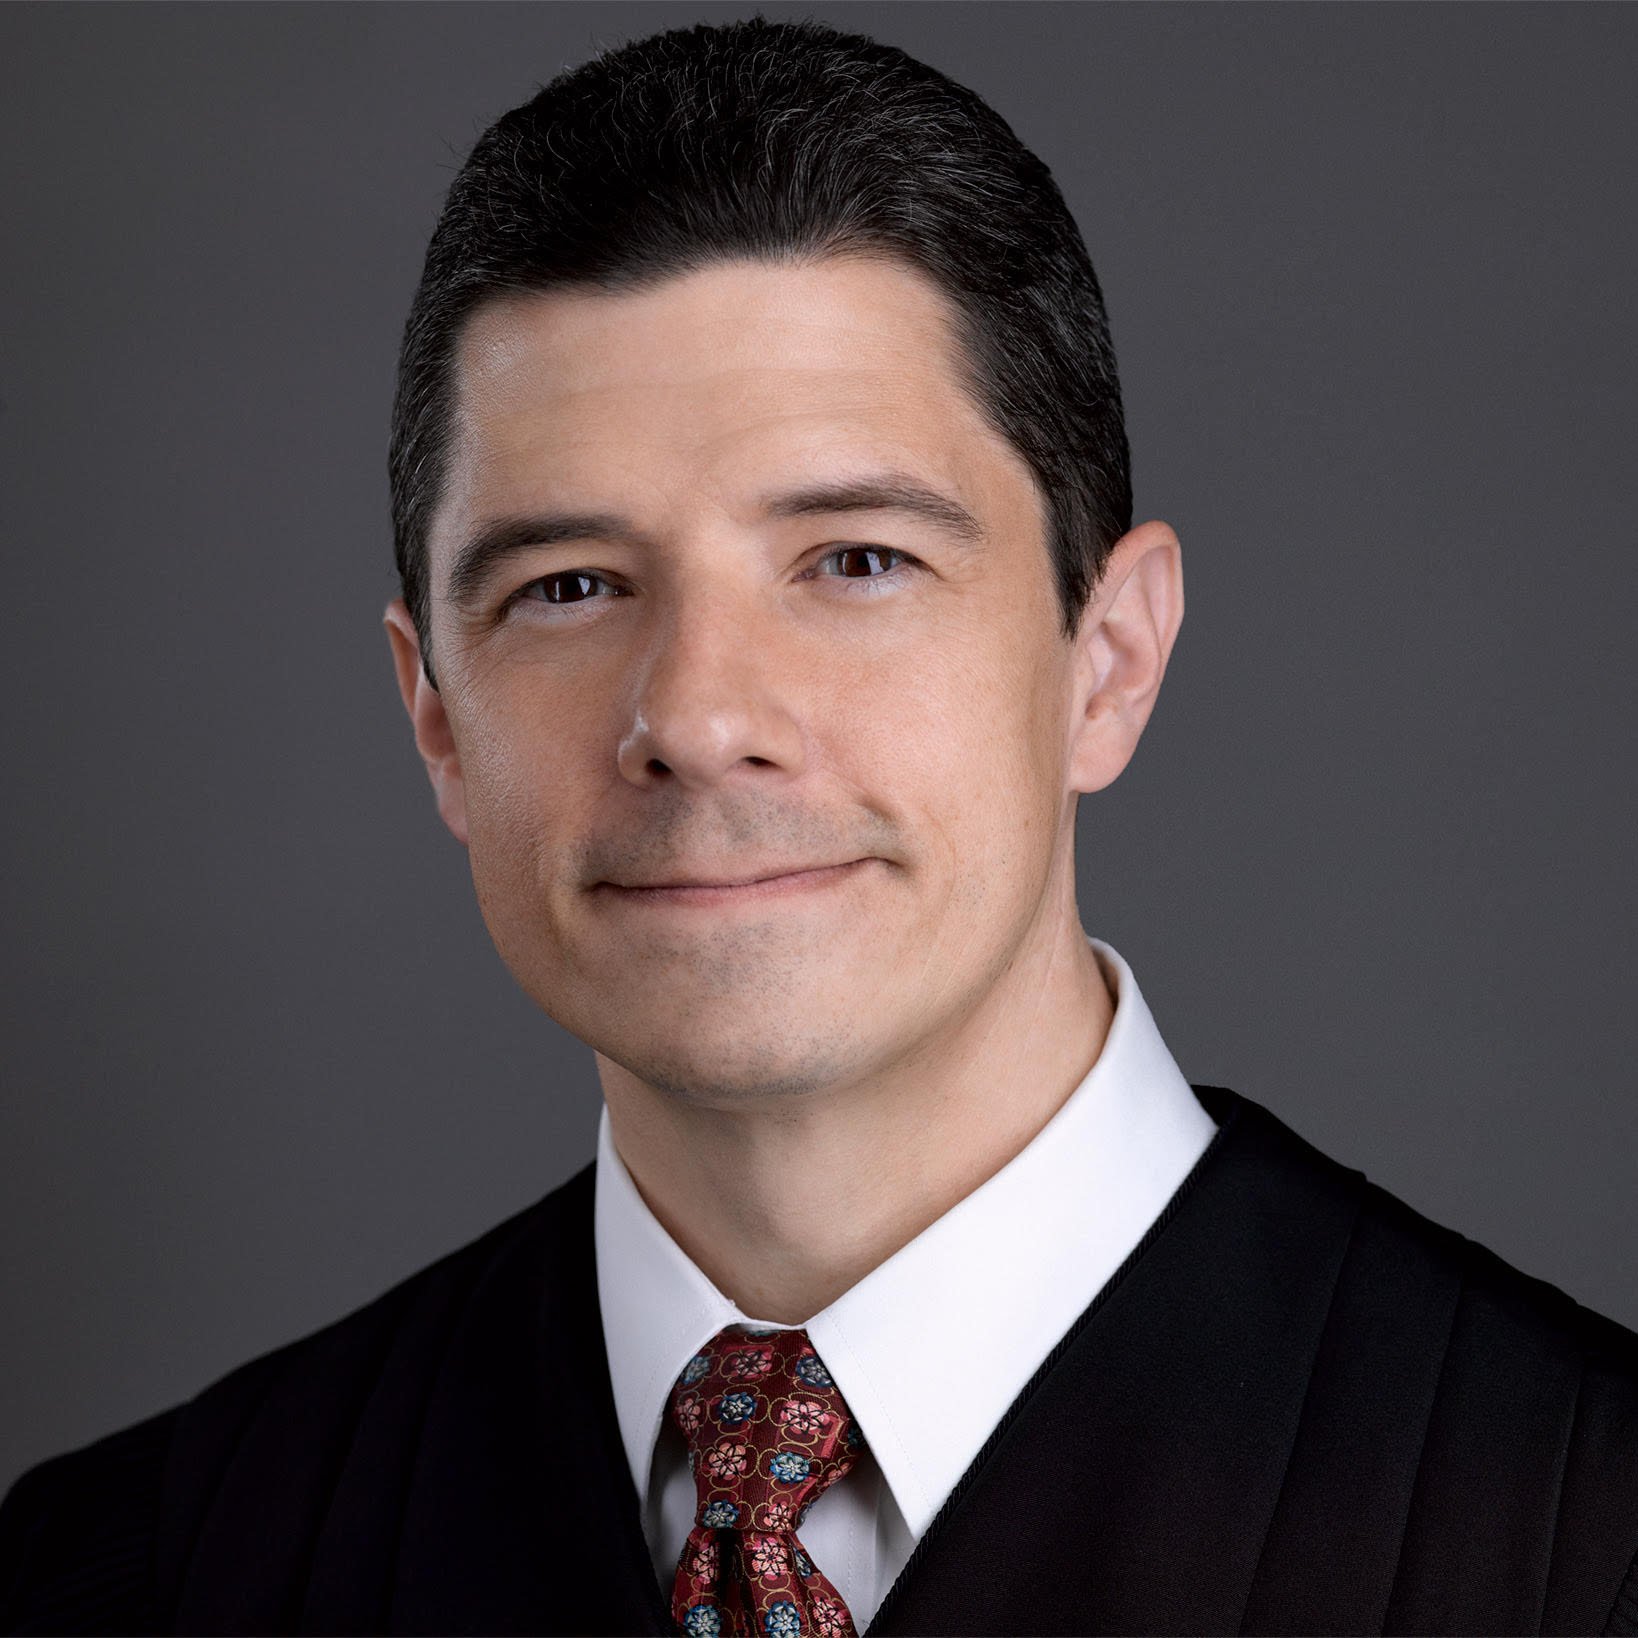 Justice Brett Busby wearing a suit and tie smiling and looking at the camera